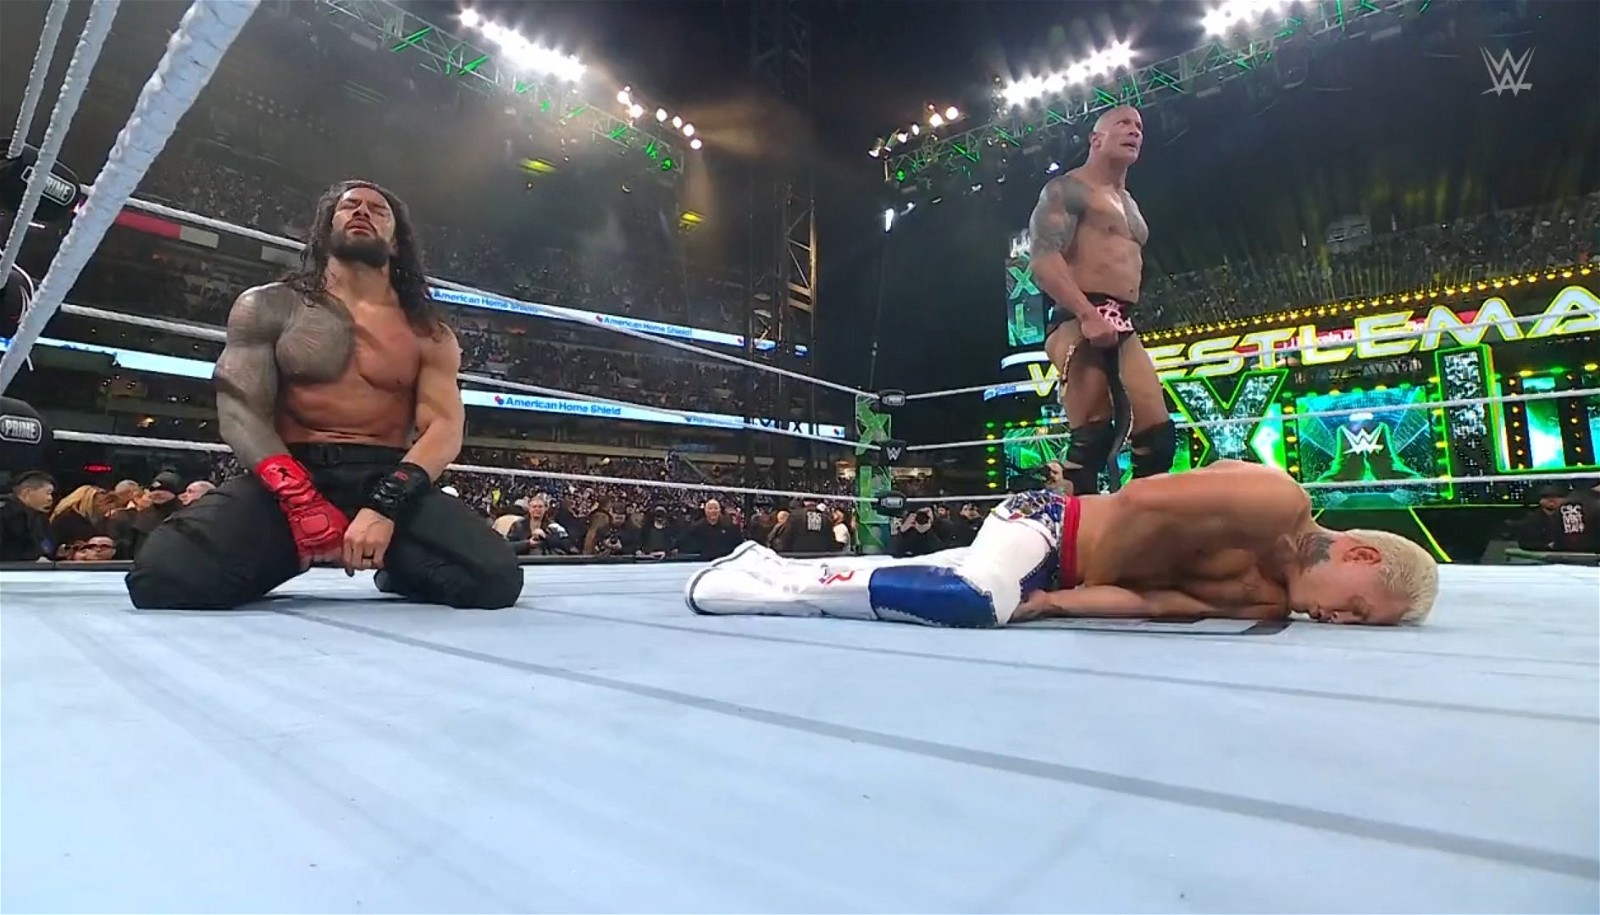 The Rock & Roman Reigns win the tag match defeating Cody Rhodes and Seth Rollins | Credit- Twitter: @ibeastIess)